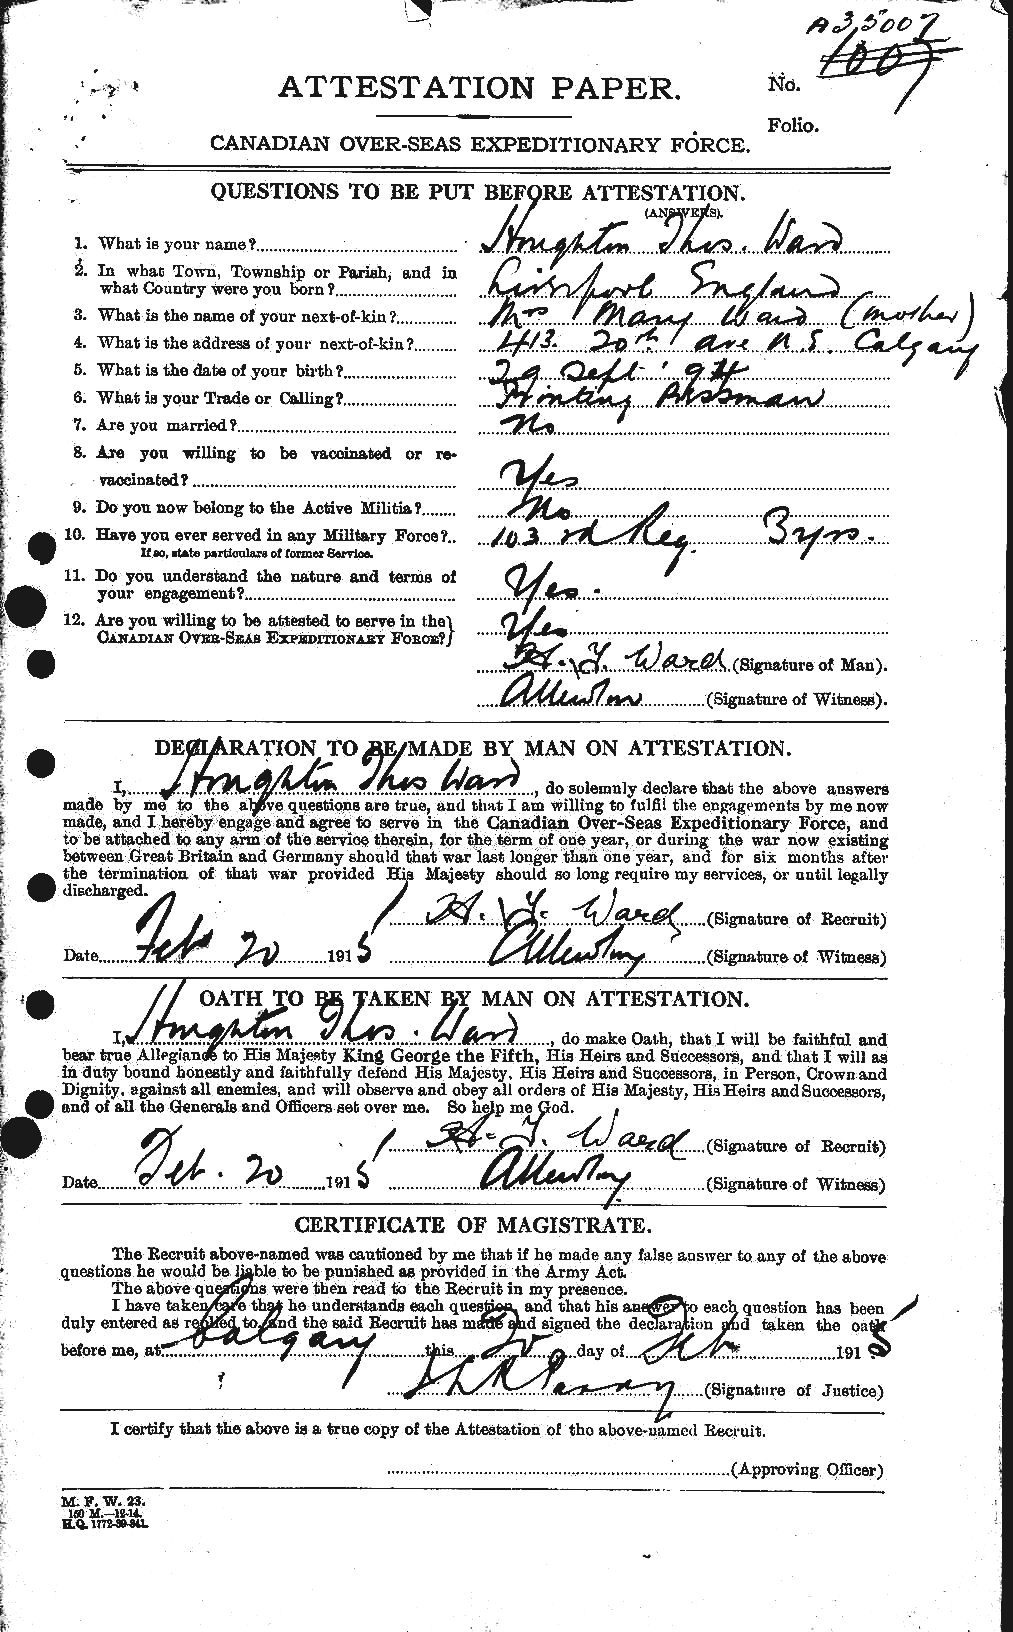 Personnel Records of the First World War - CEF 657862a